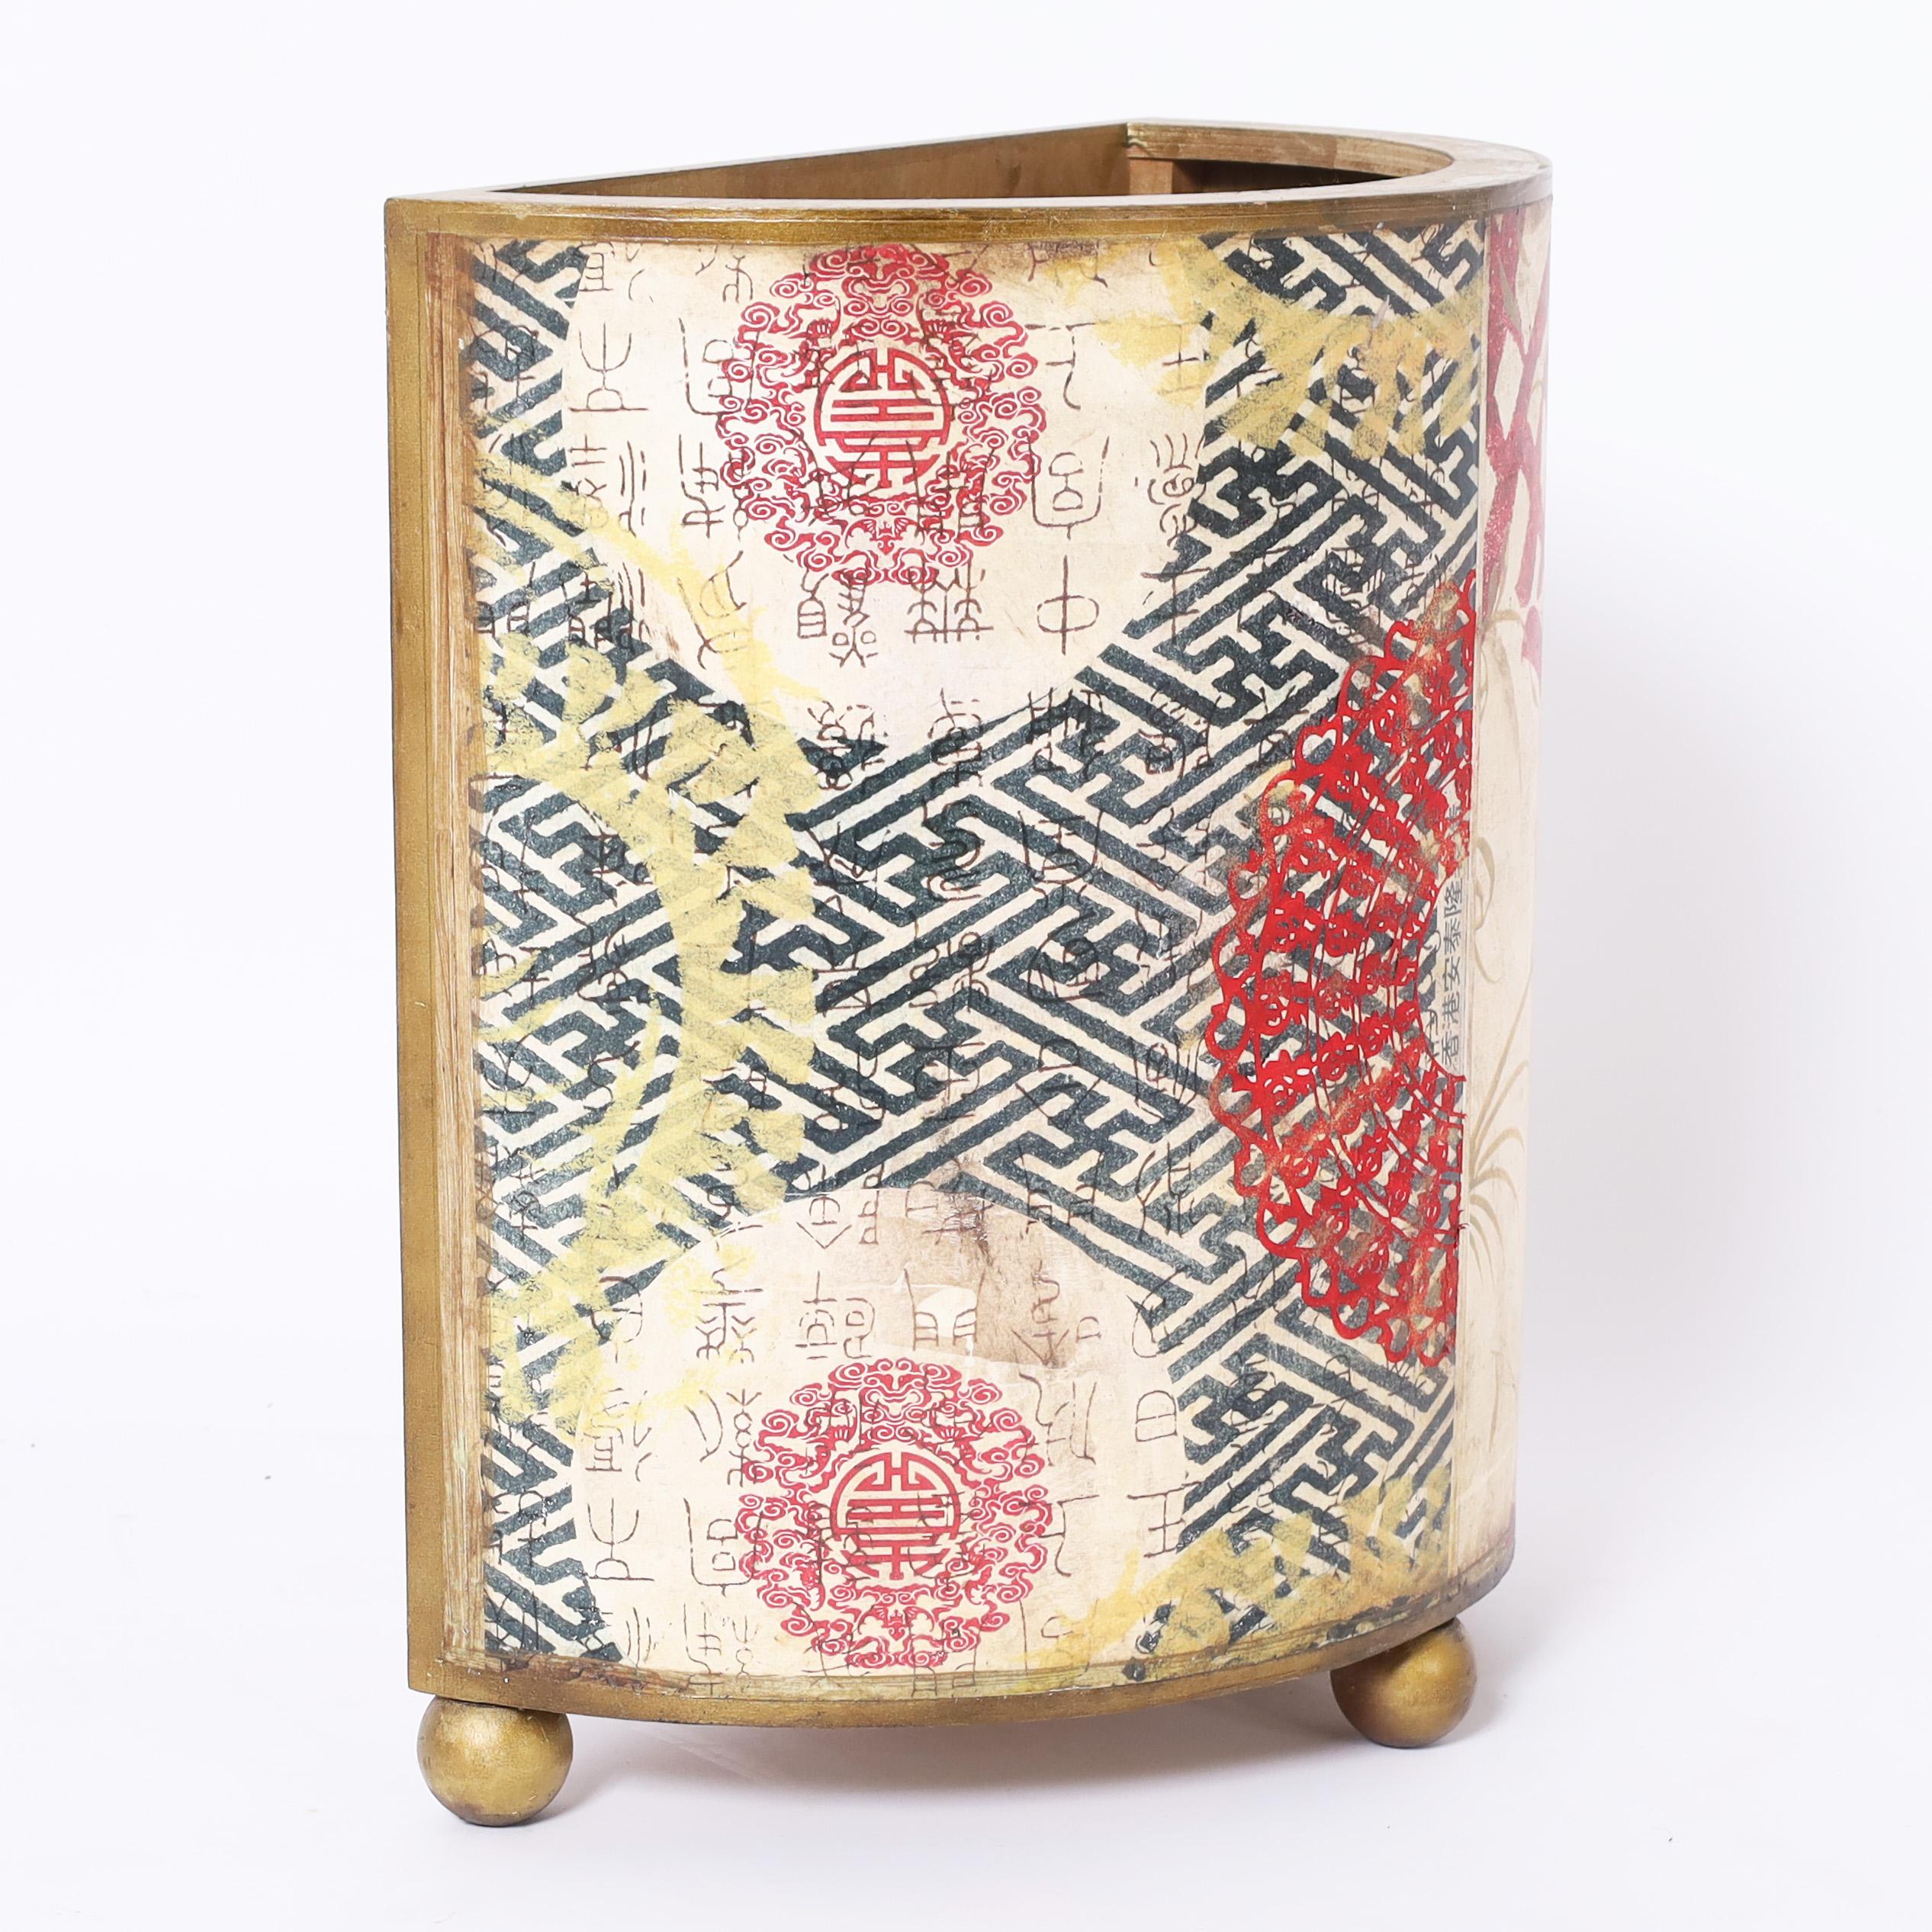 Chic mid century trash can crafted in wood decorated with lithographic chinese characters against geometric and floral designs set on ball feet.